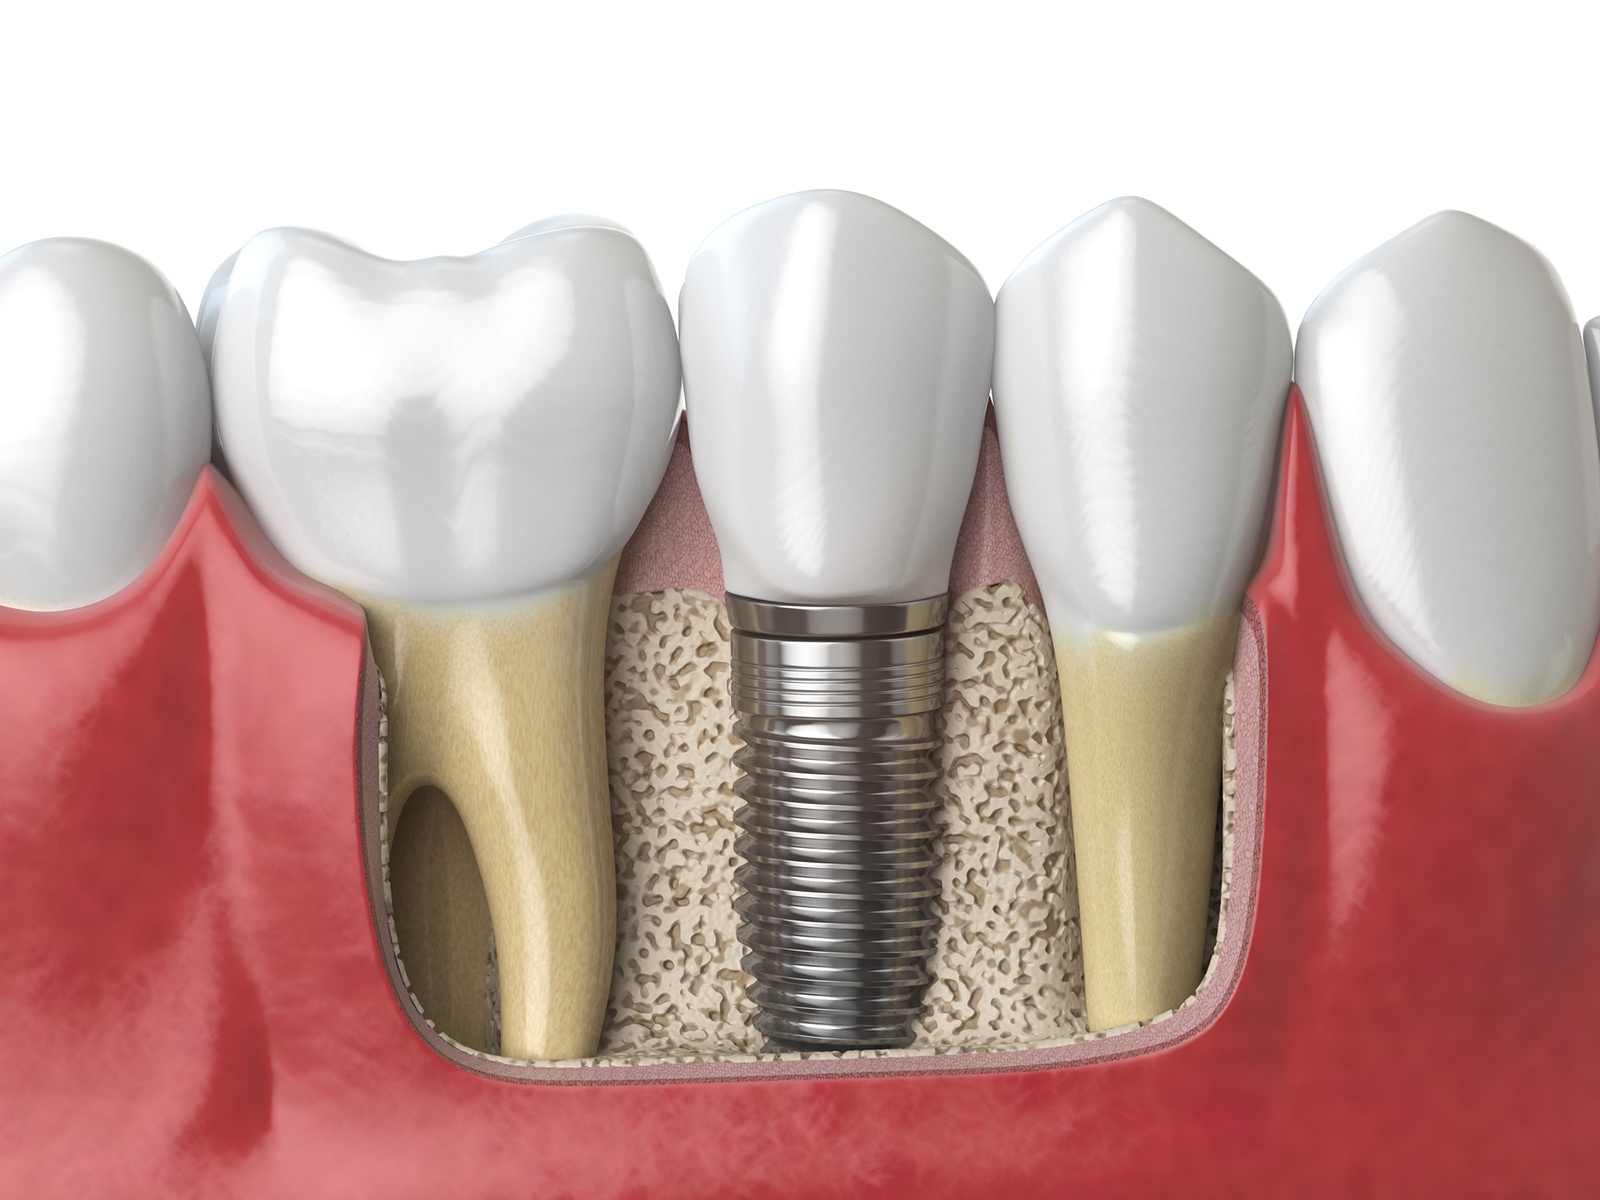 What Are The Pros and Cons of The Implant?